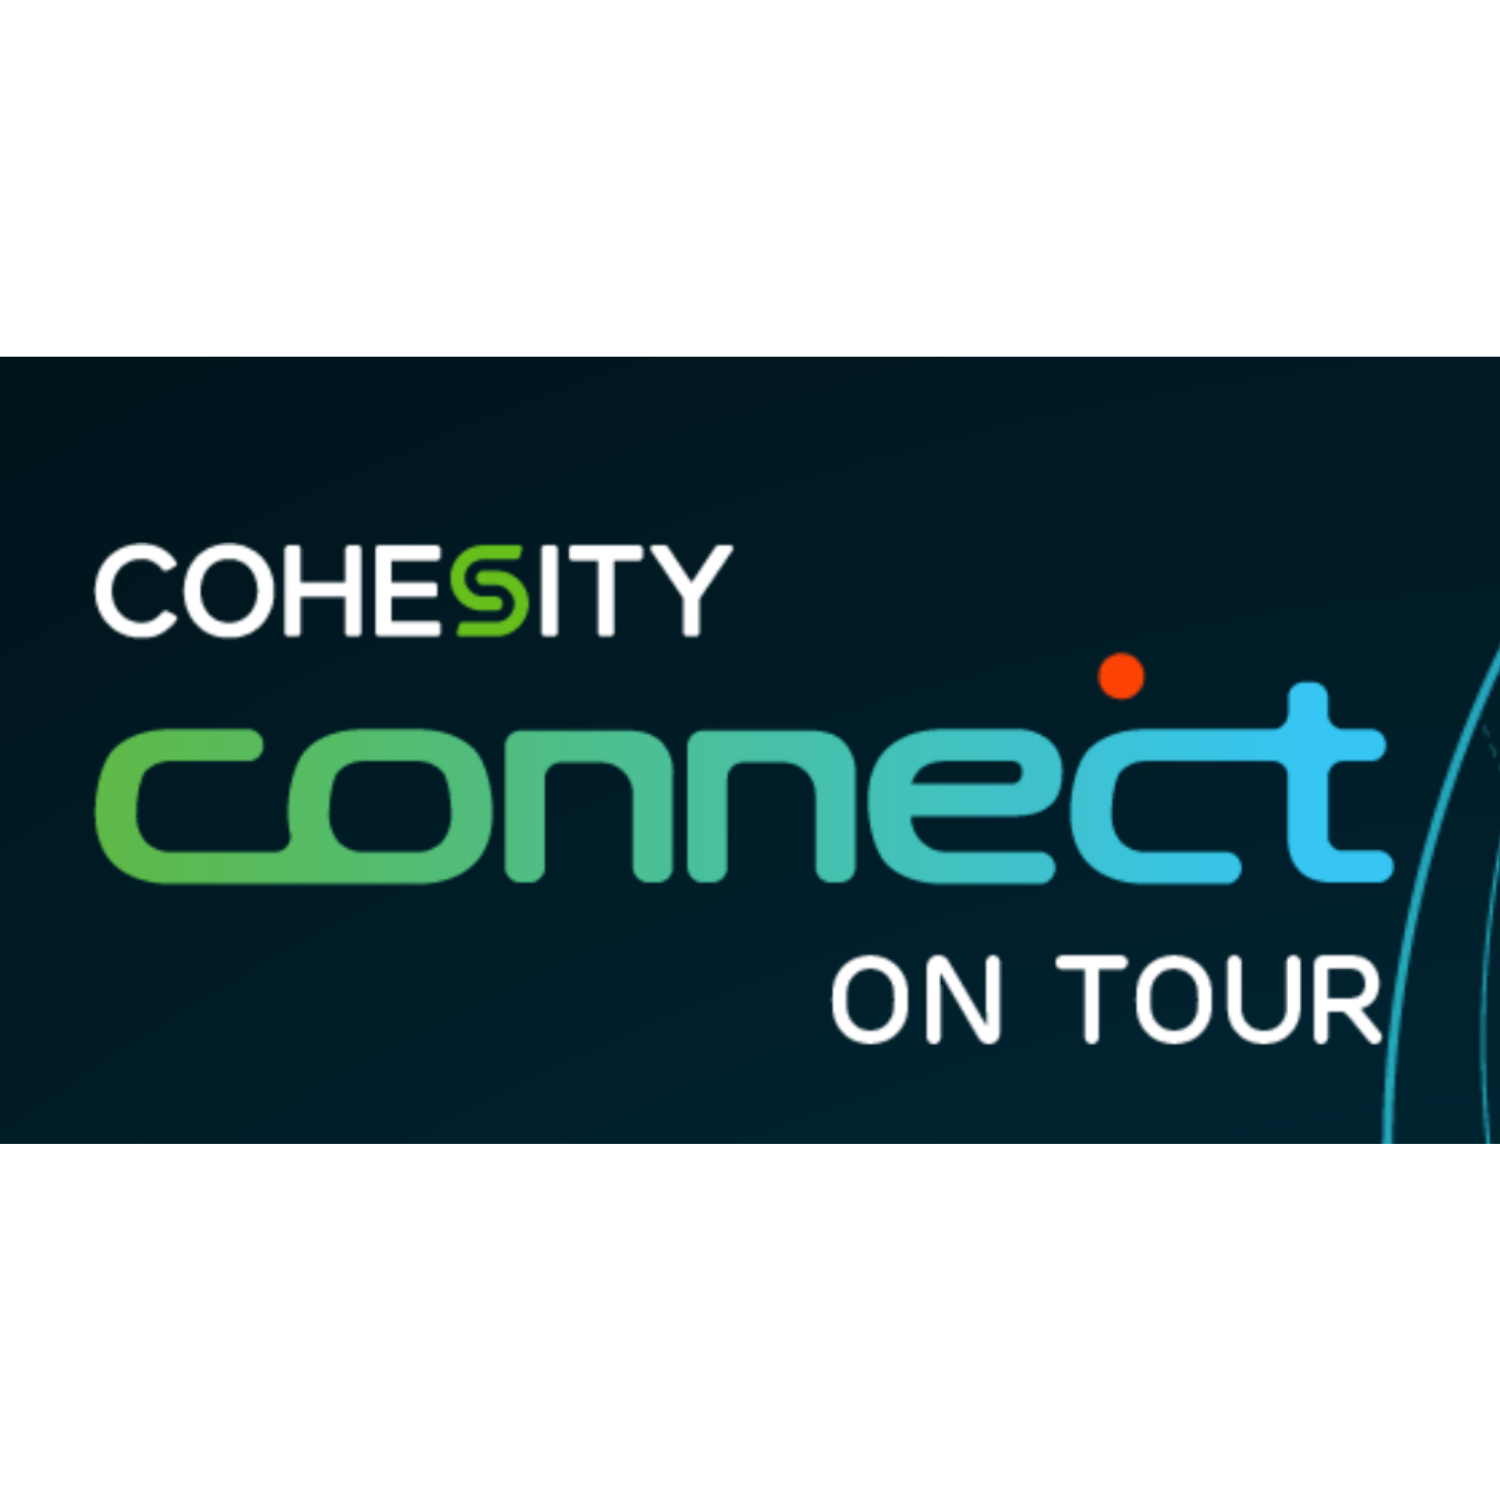 Meet Aexus at Cohesity's Connect on Tour Edition Benelux Aexus